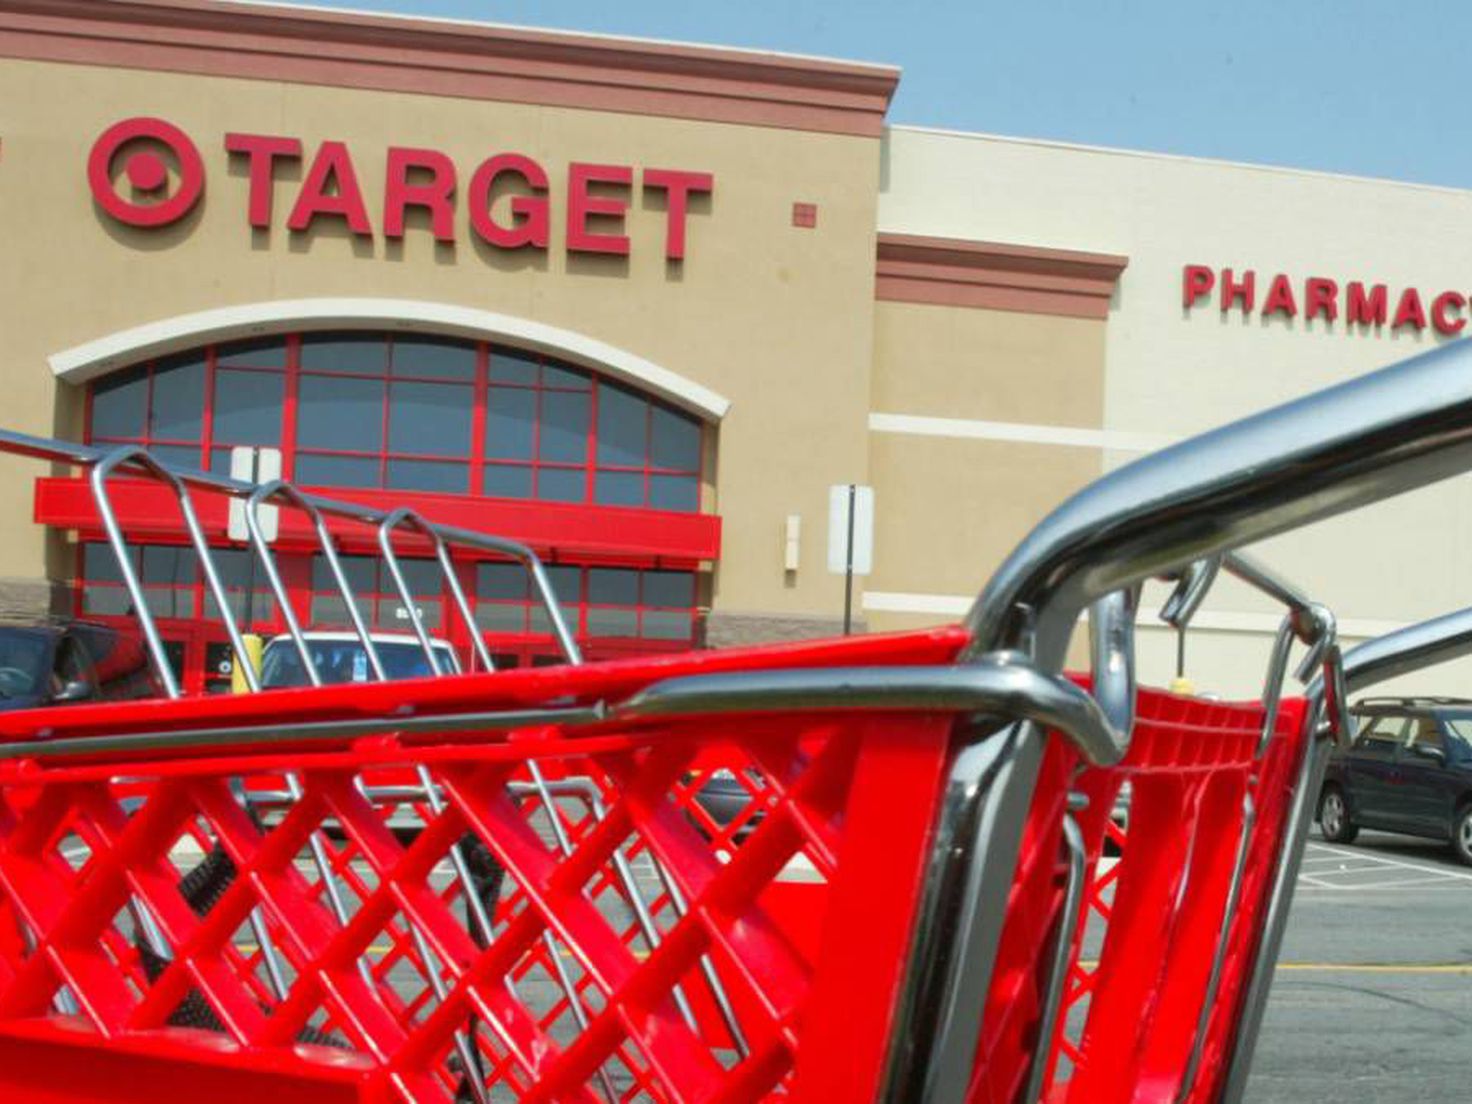 Target's new Las Vegas small-format store opening